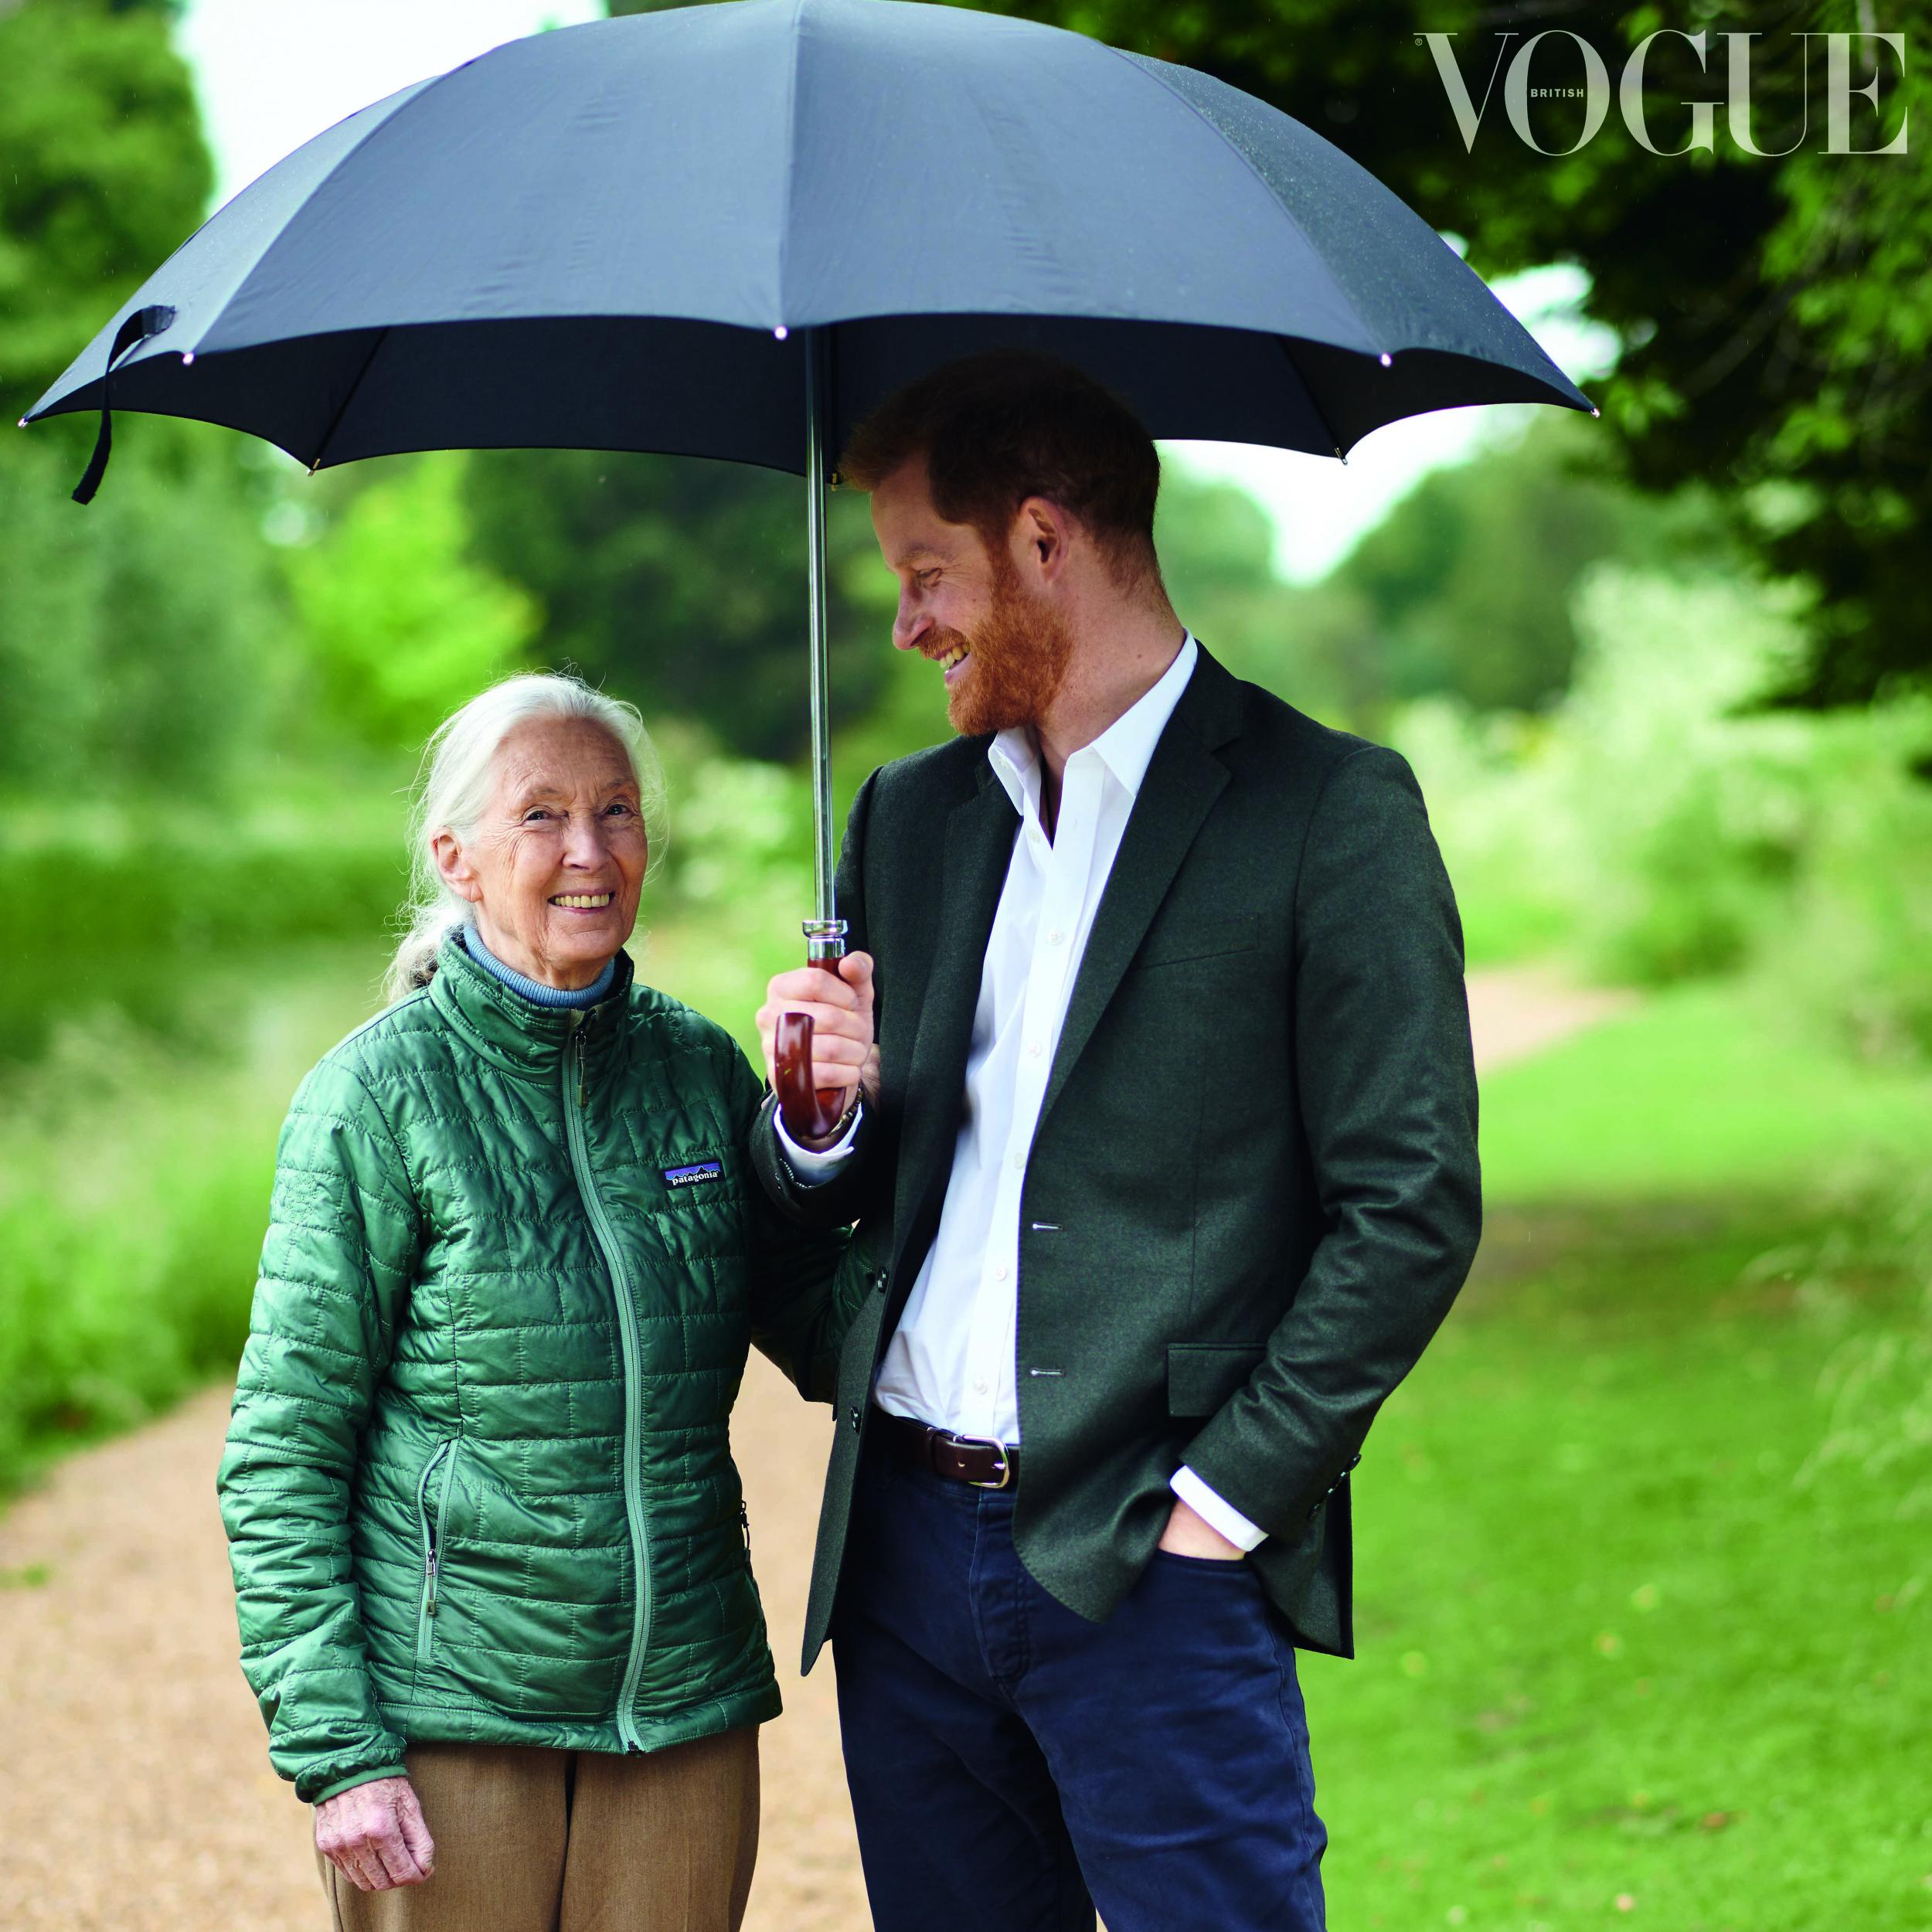 His Royal Highness, The Duke of Sussex interviews Dr Jane Goodall in the September Issue of British Vogue